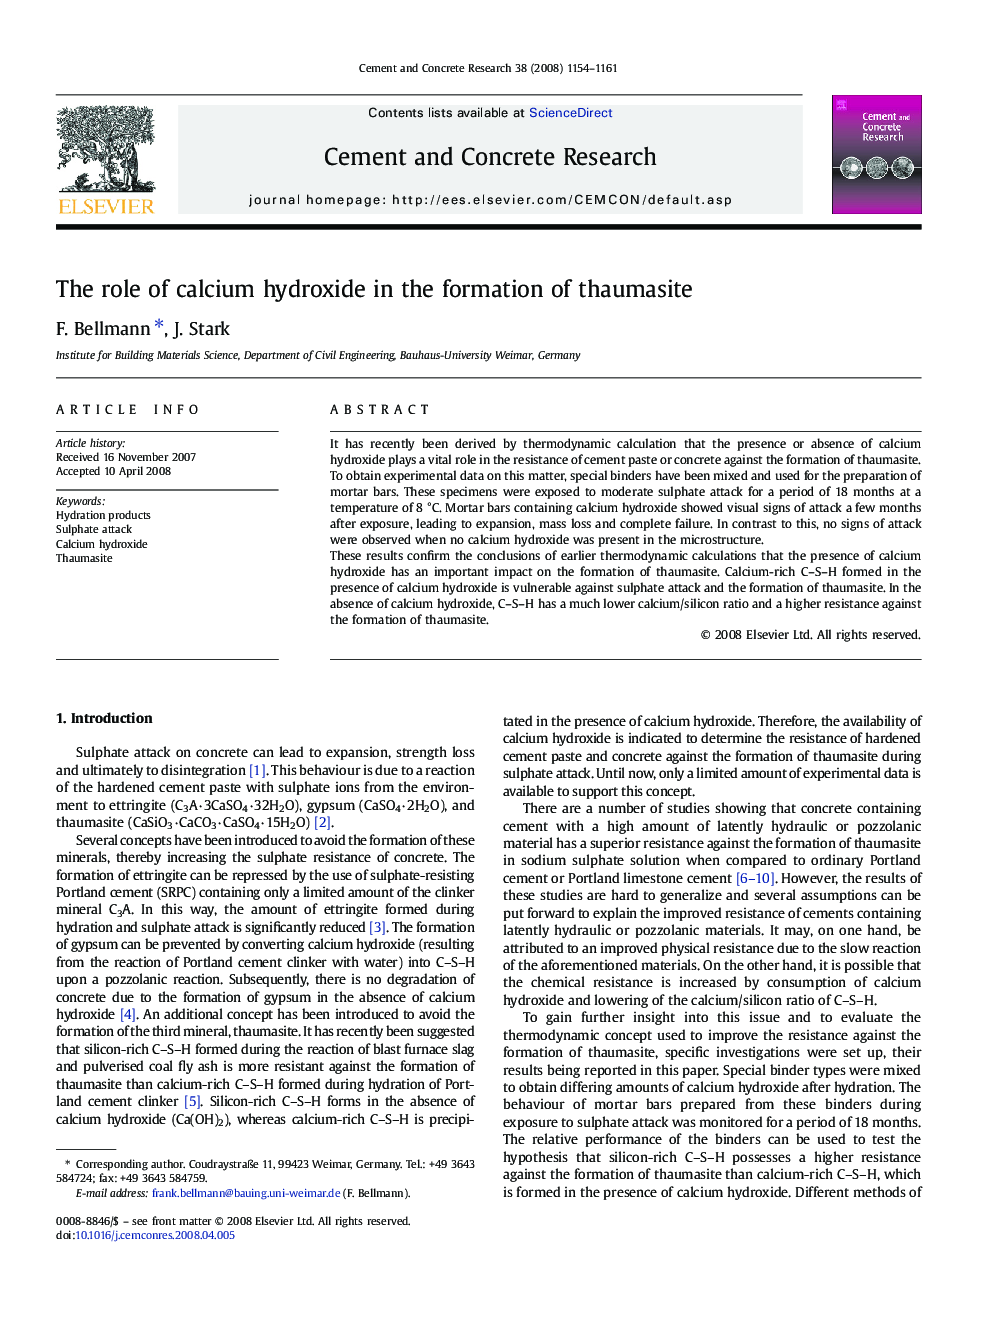 The role of calcium hydroxide in the formation of thaumasite